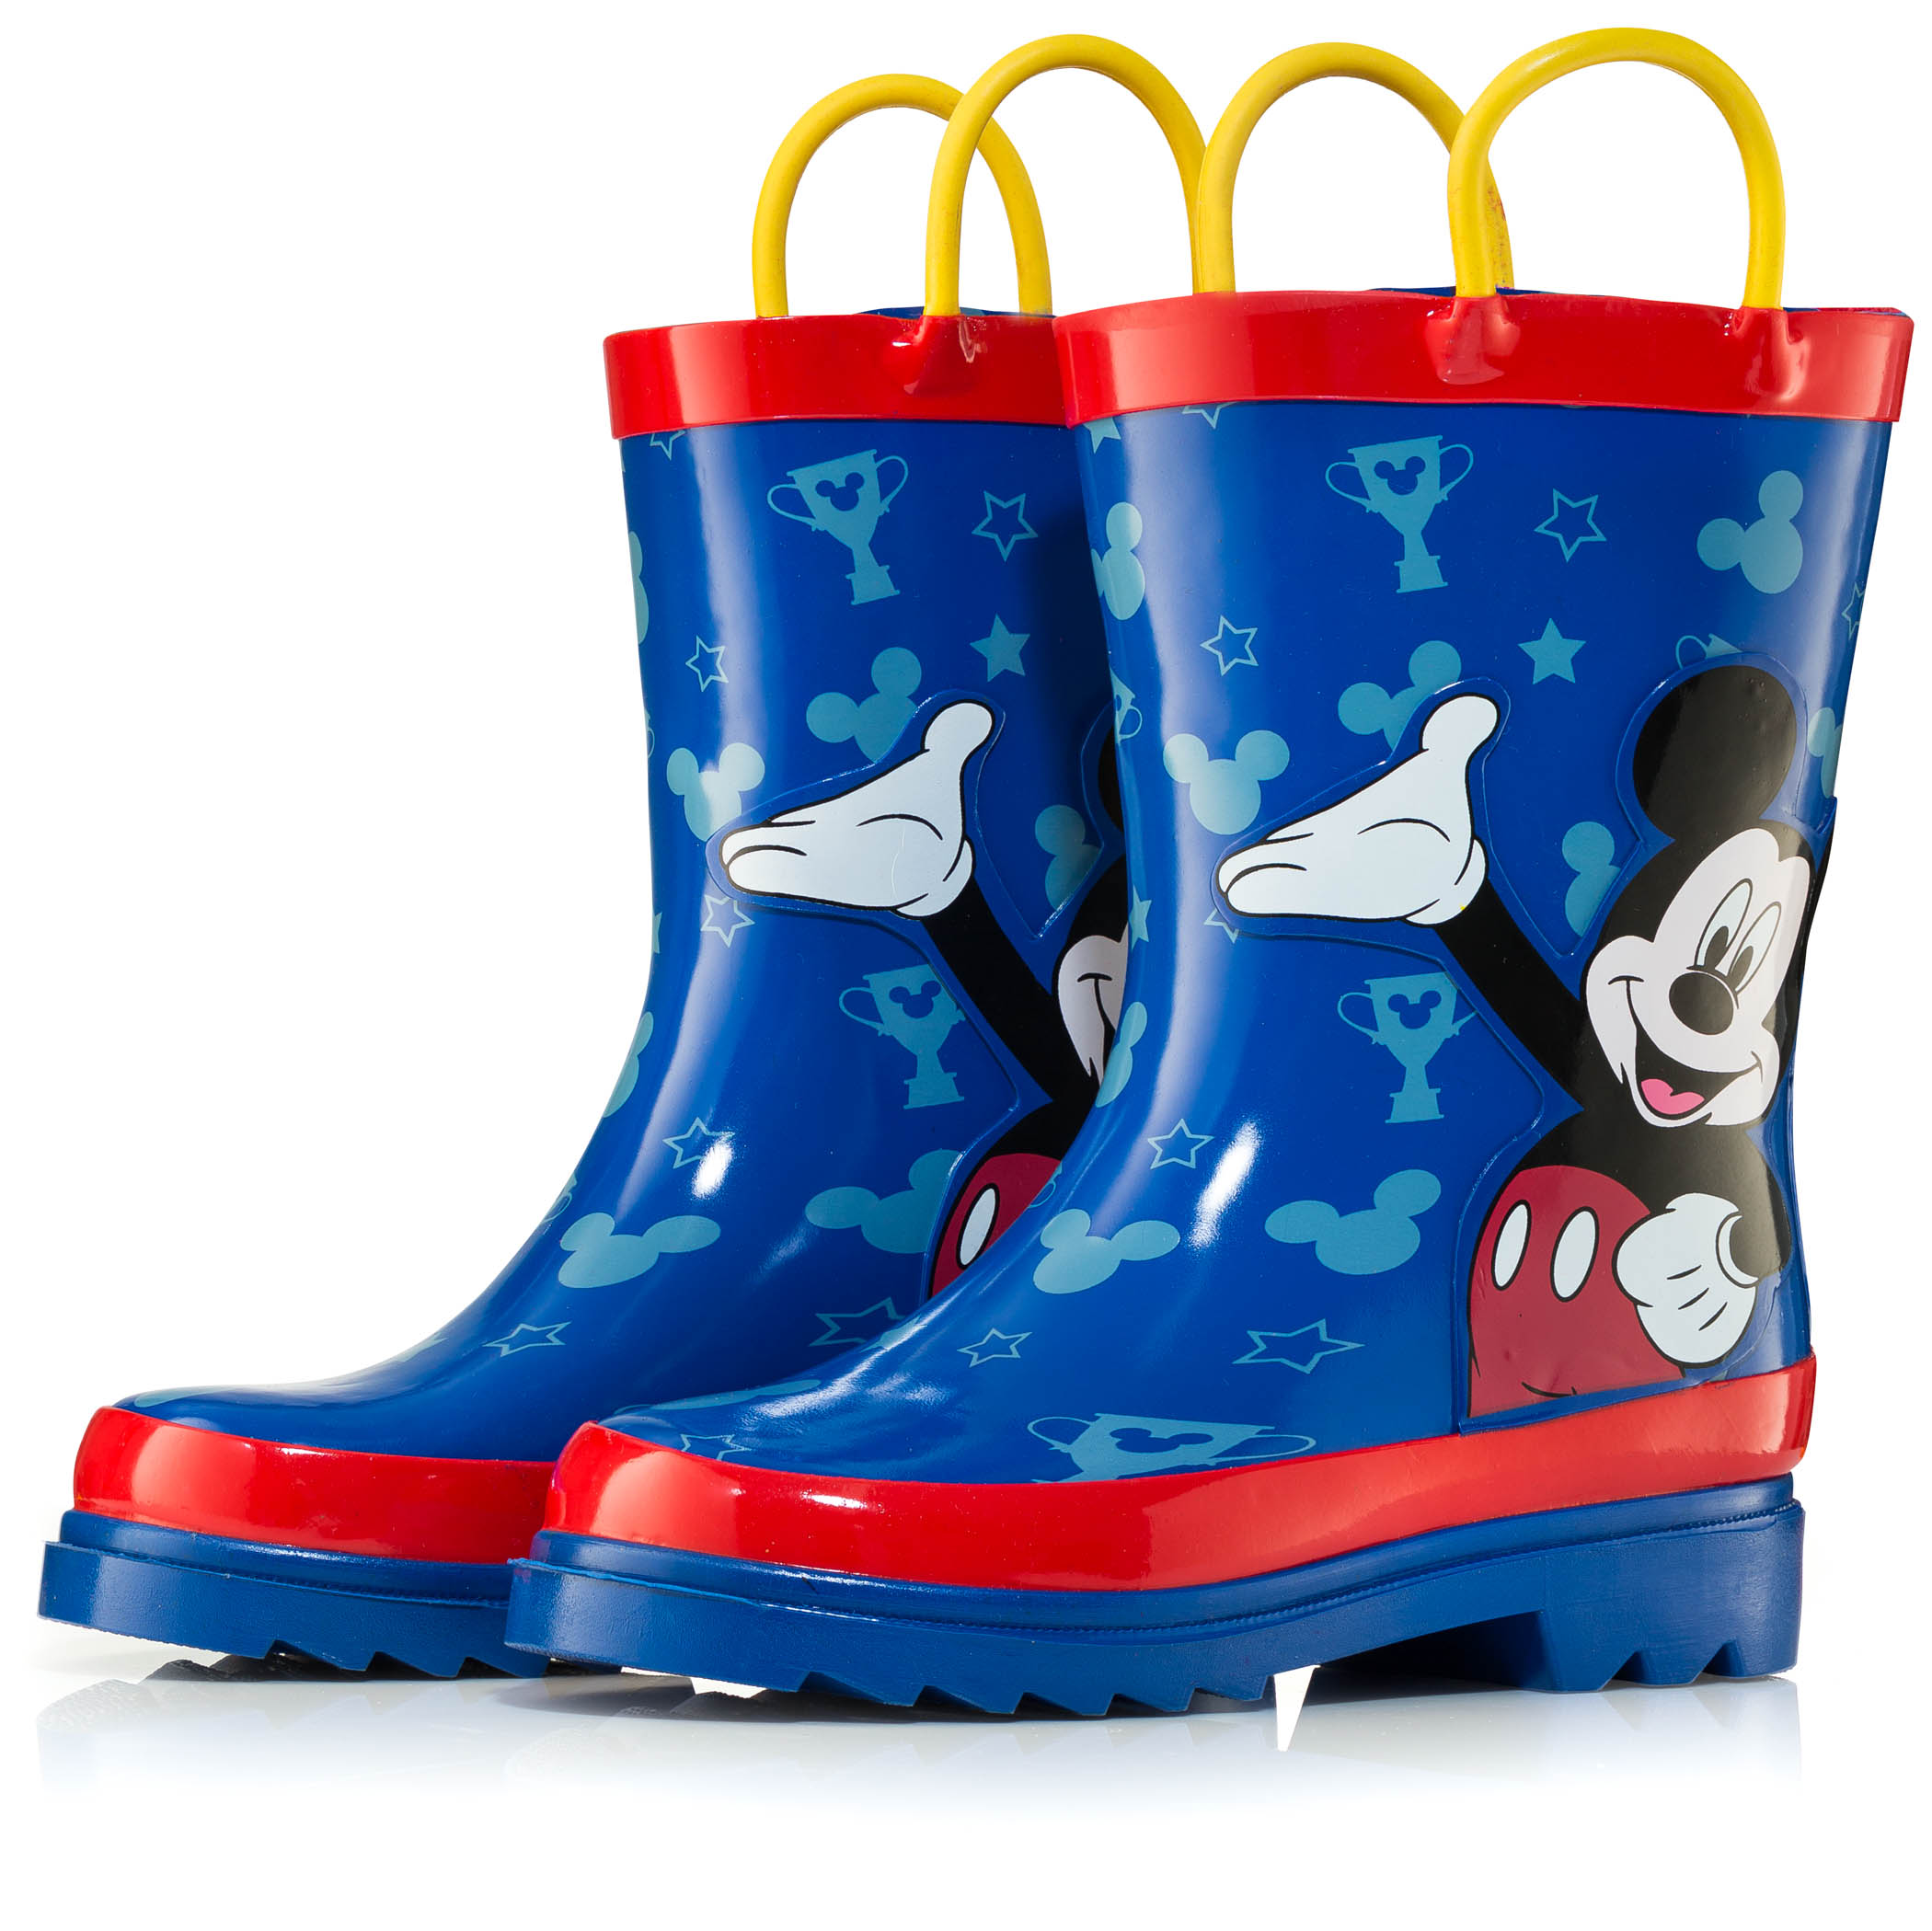 Disney Mickey Mouse Blue Rubber Rain Boots - Size 11 toddler - image 1 of 6